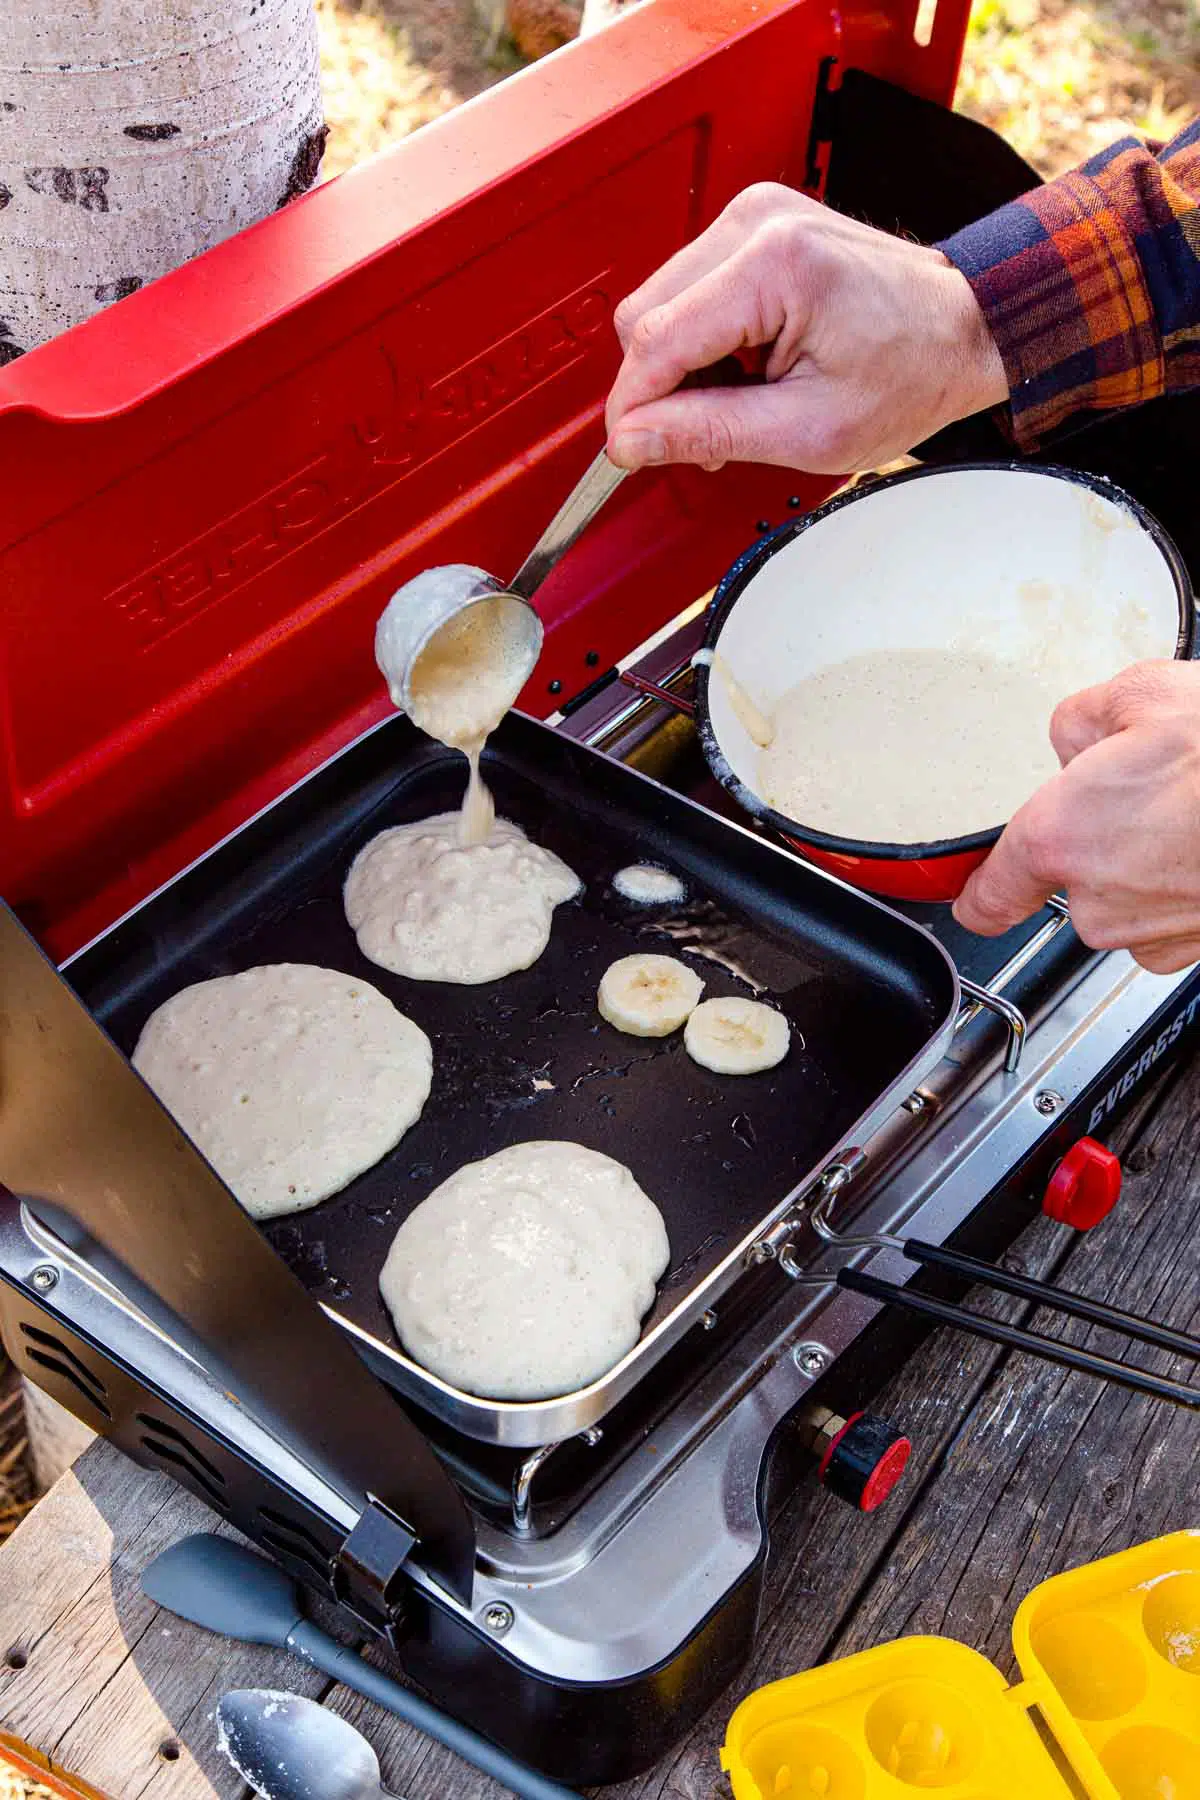 Michael adding pancake batter to a griddle on a camping stove